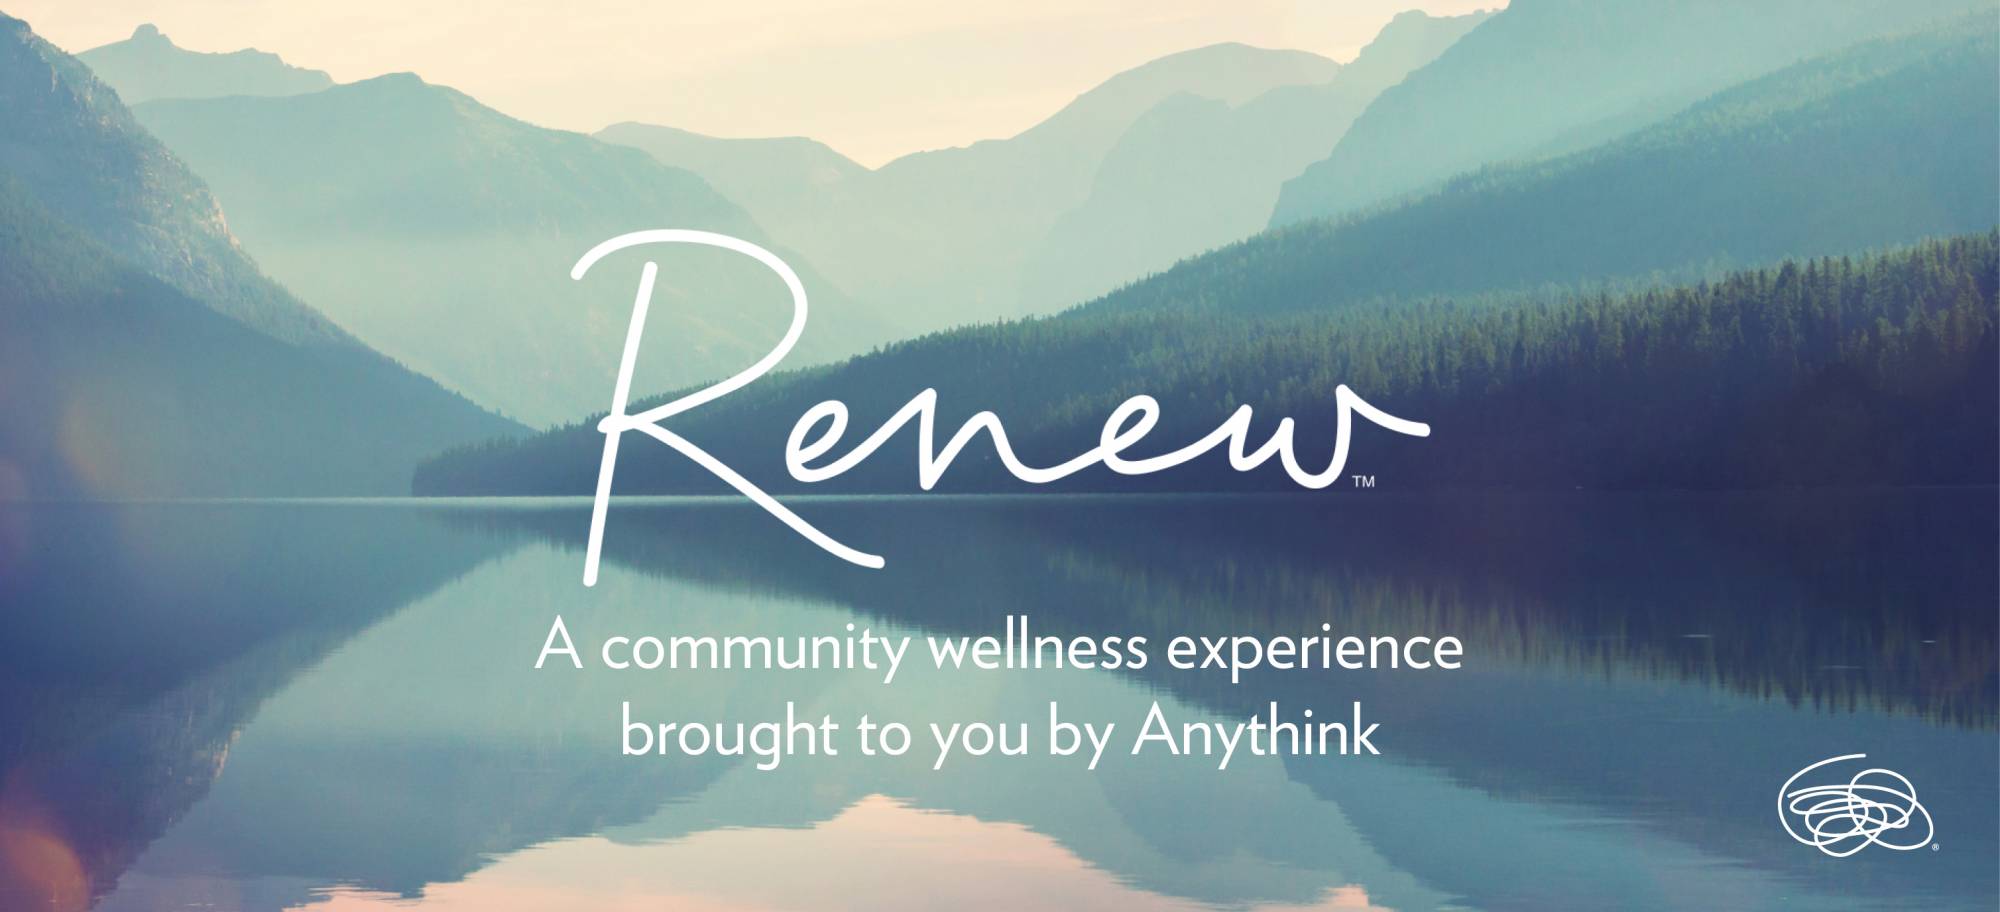 Graphic for Renew, a community wellness experience brought to you by Anythink, White text, blue-toned background showing sky, mountains and lake reflection